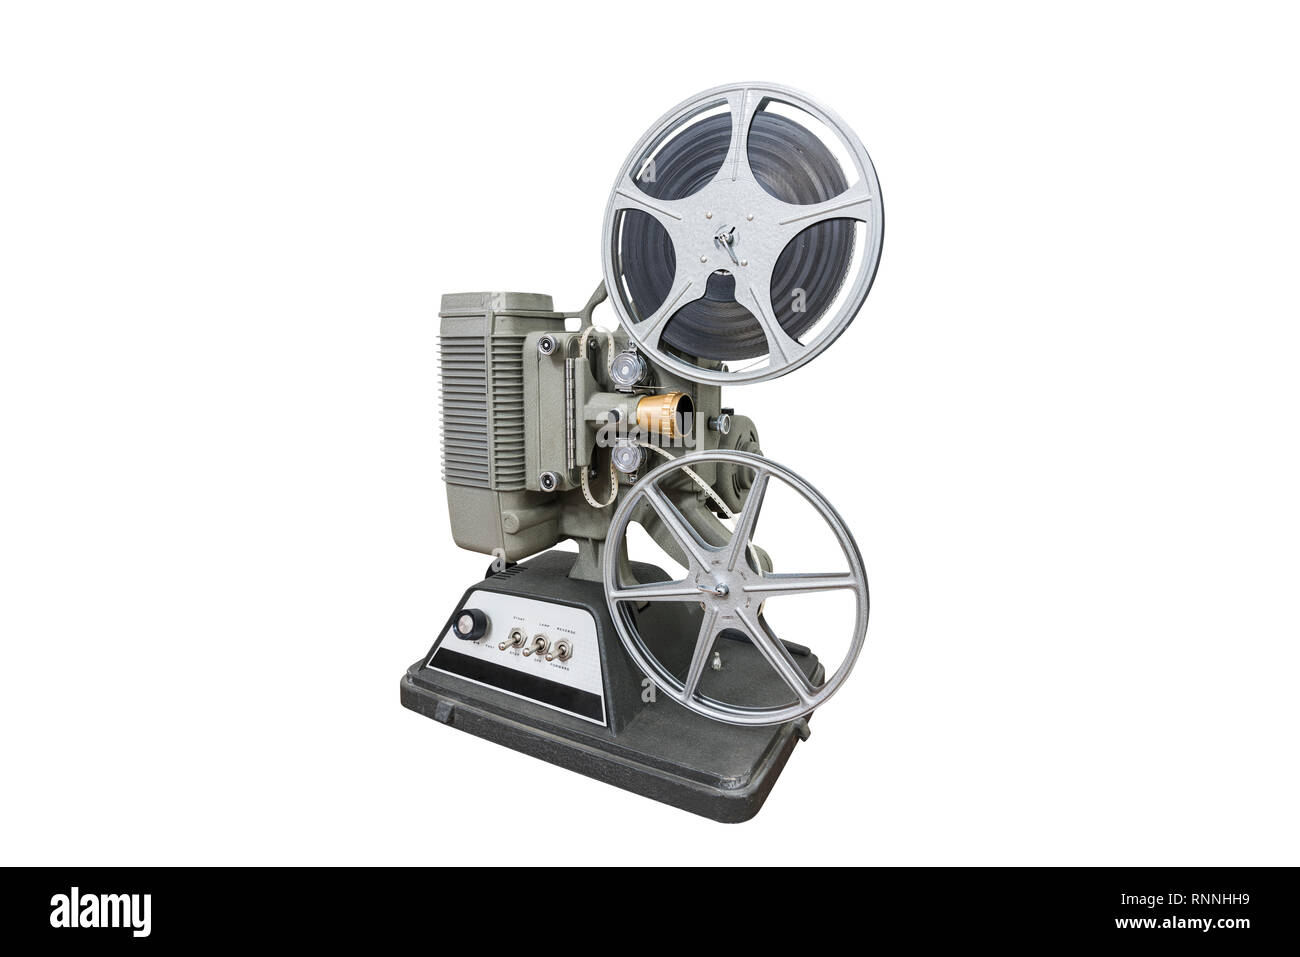 https://c8.alamy.com/comp/RNNHH9/vintage-8mm-home-movie-projector-isolated-on-white-RNNHH9.jpg